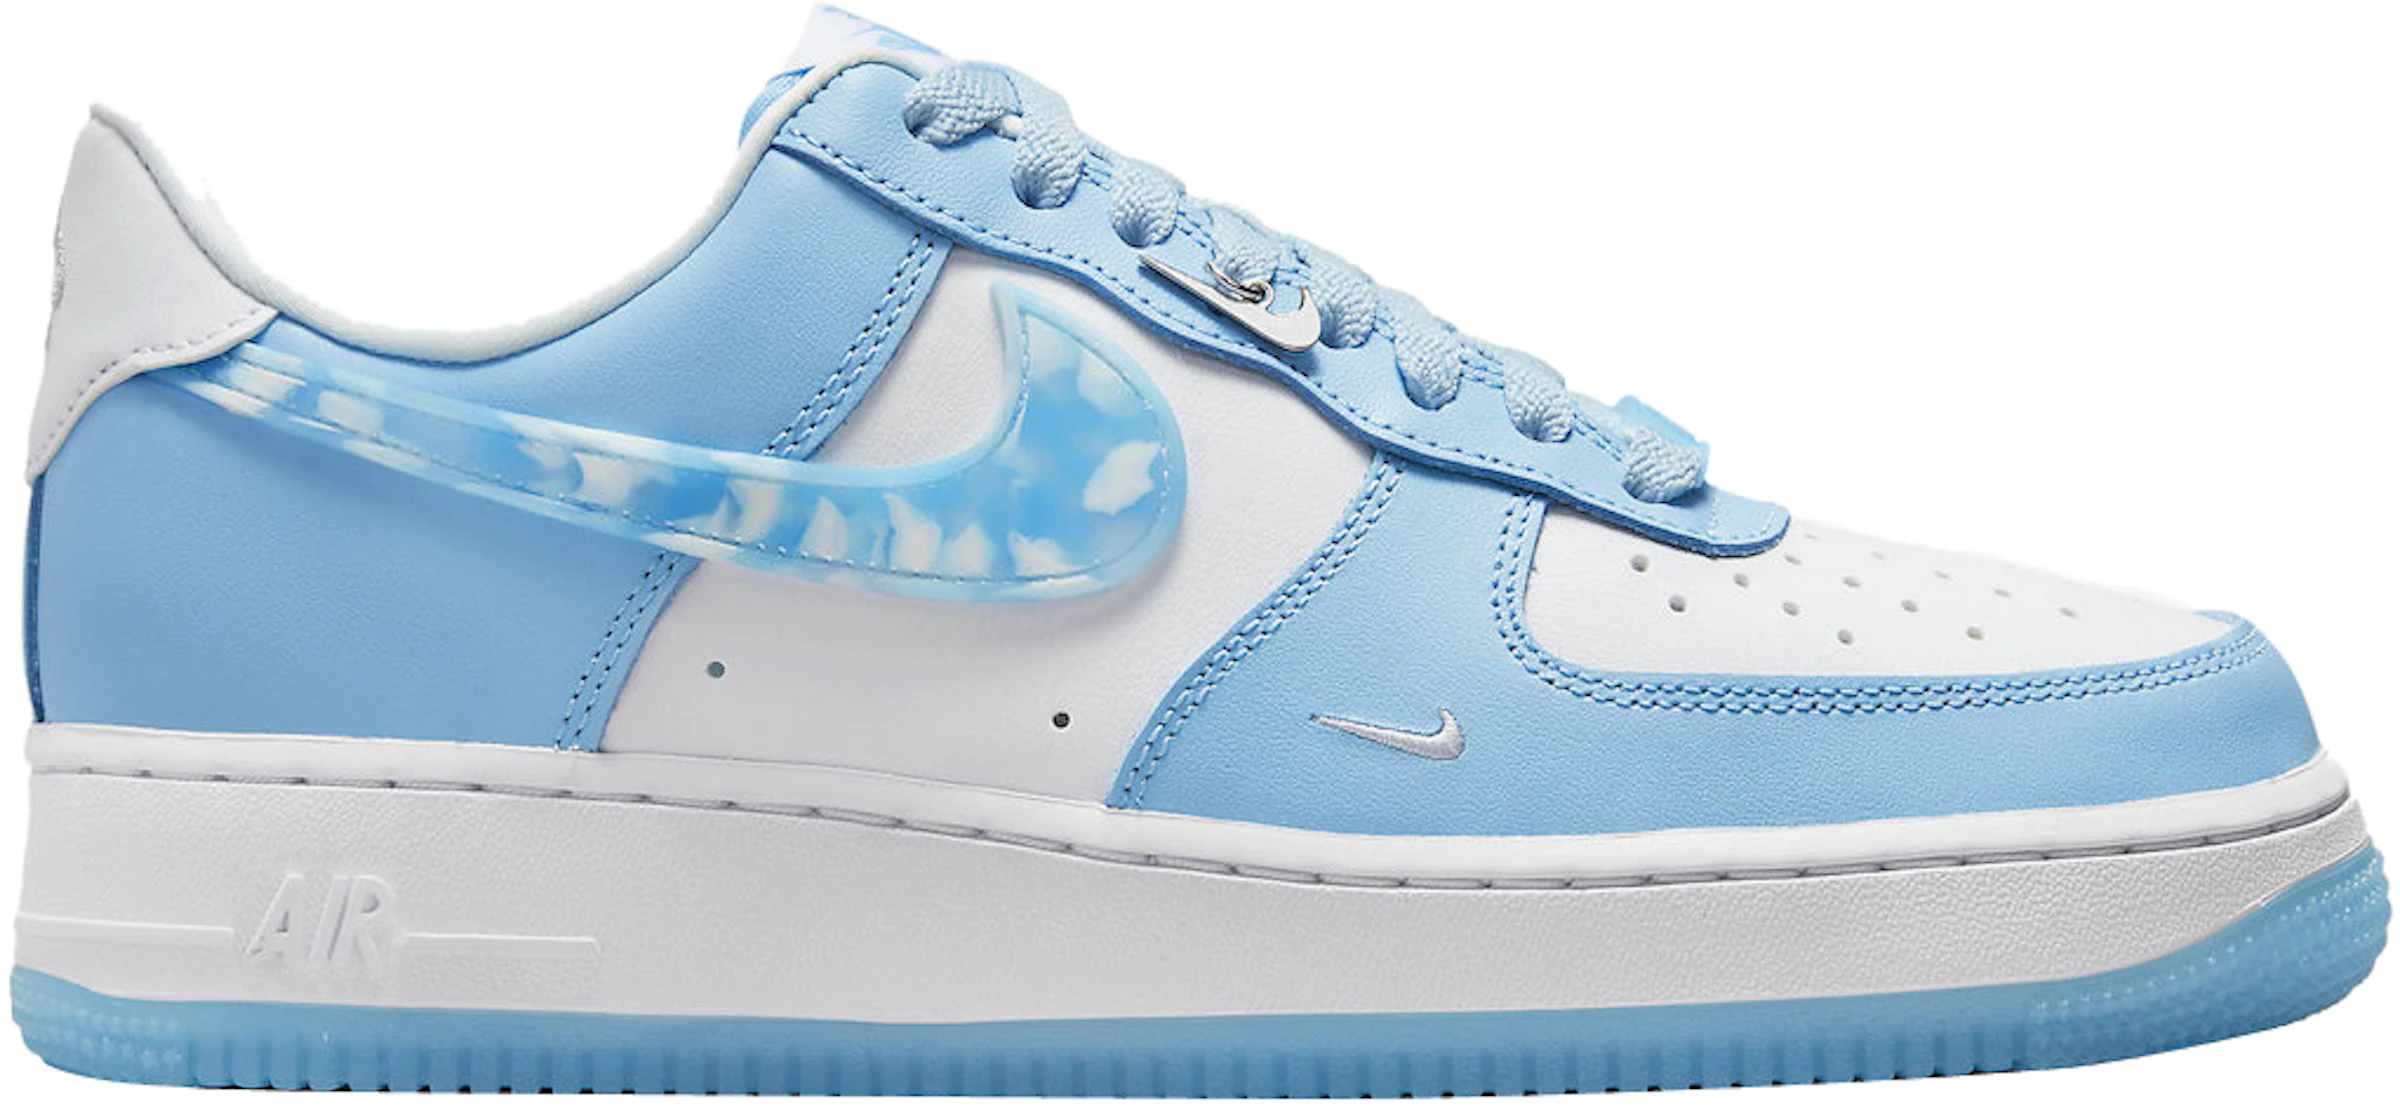 1. Nike Air Force 1 Low "Nail Art" - wide 2